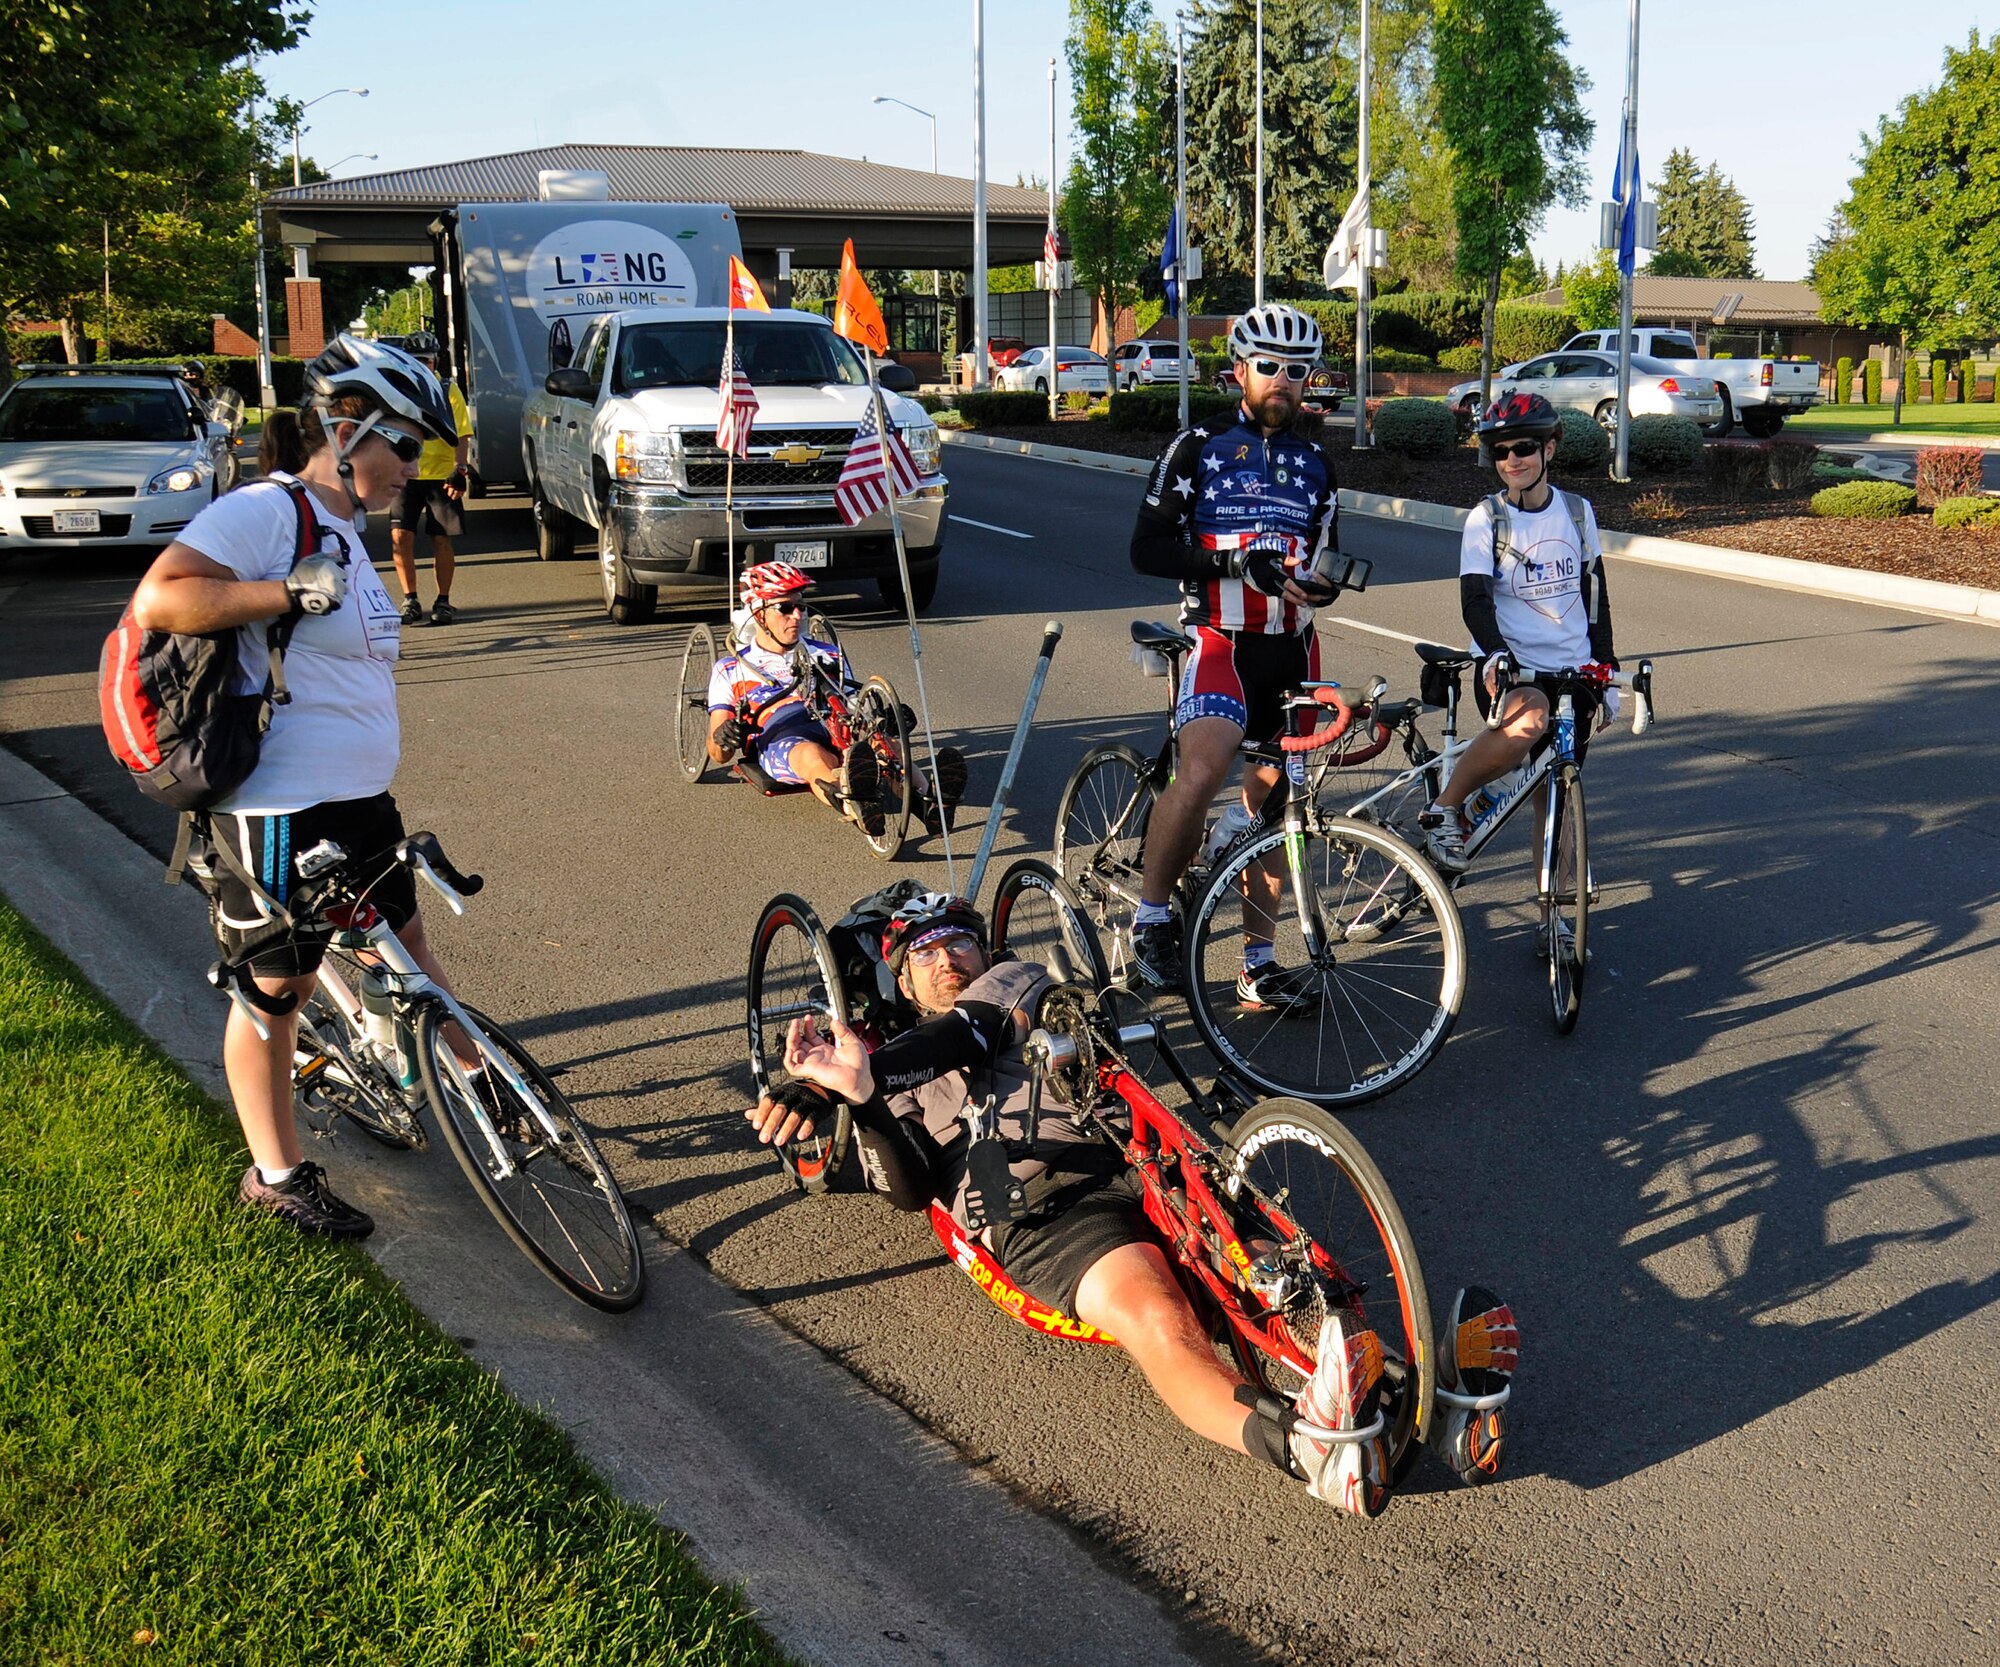 All five riders of the Long Road Home Project prepare to depart Fairchild Air Force Base, Wash., July 25, 2012. Their 4,200 mile journey began on July 15, and will end up in Washington, D.C. (U.S. Air Force photo by Airman 1st Class Ryan Zeski) 